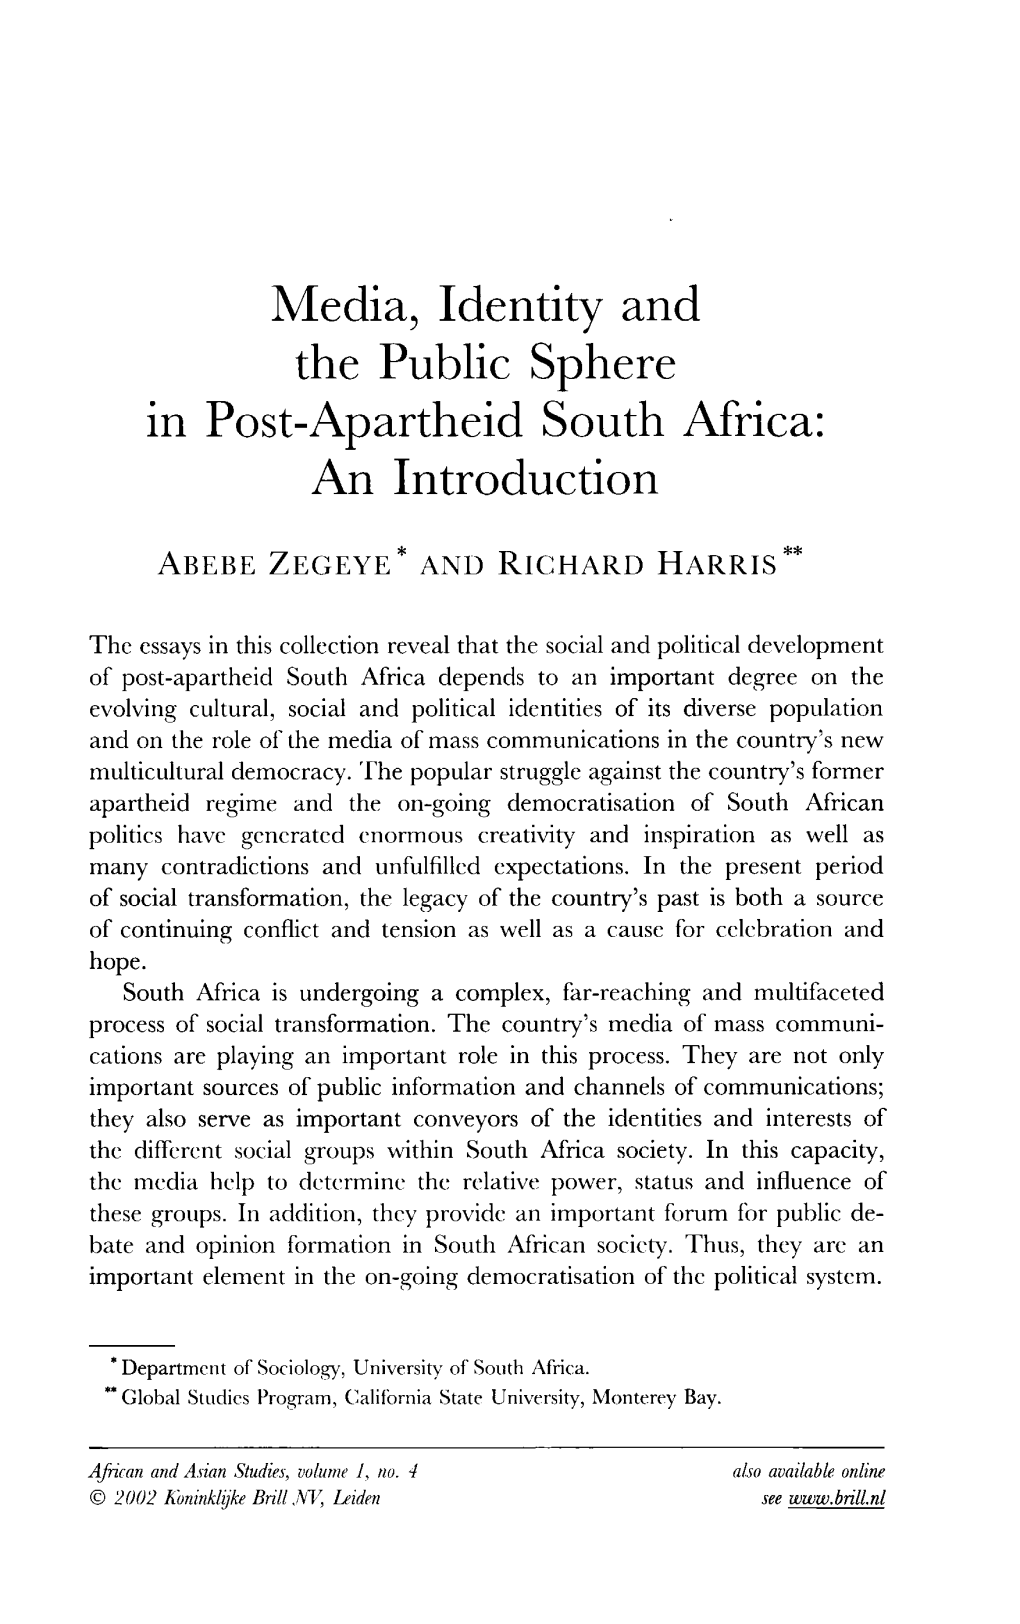 Media, Identity and the Public Sphere in Post-Apartheid South Africa: an Introduction